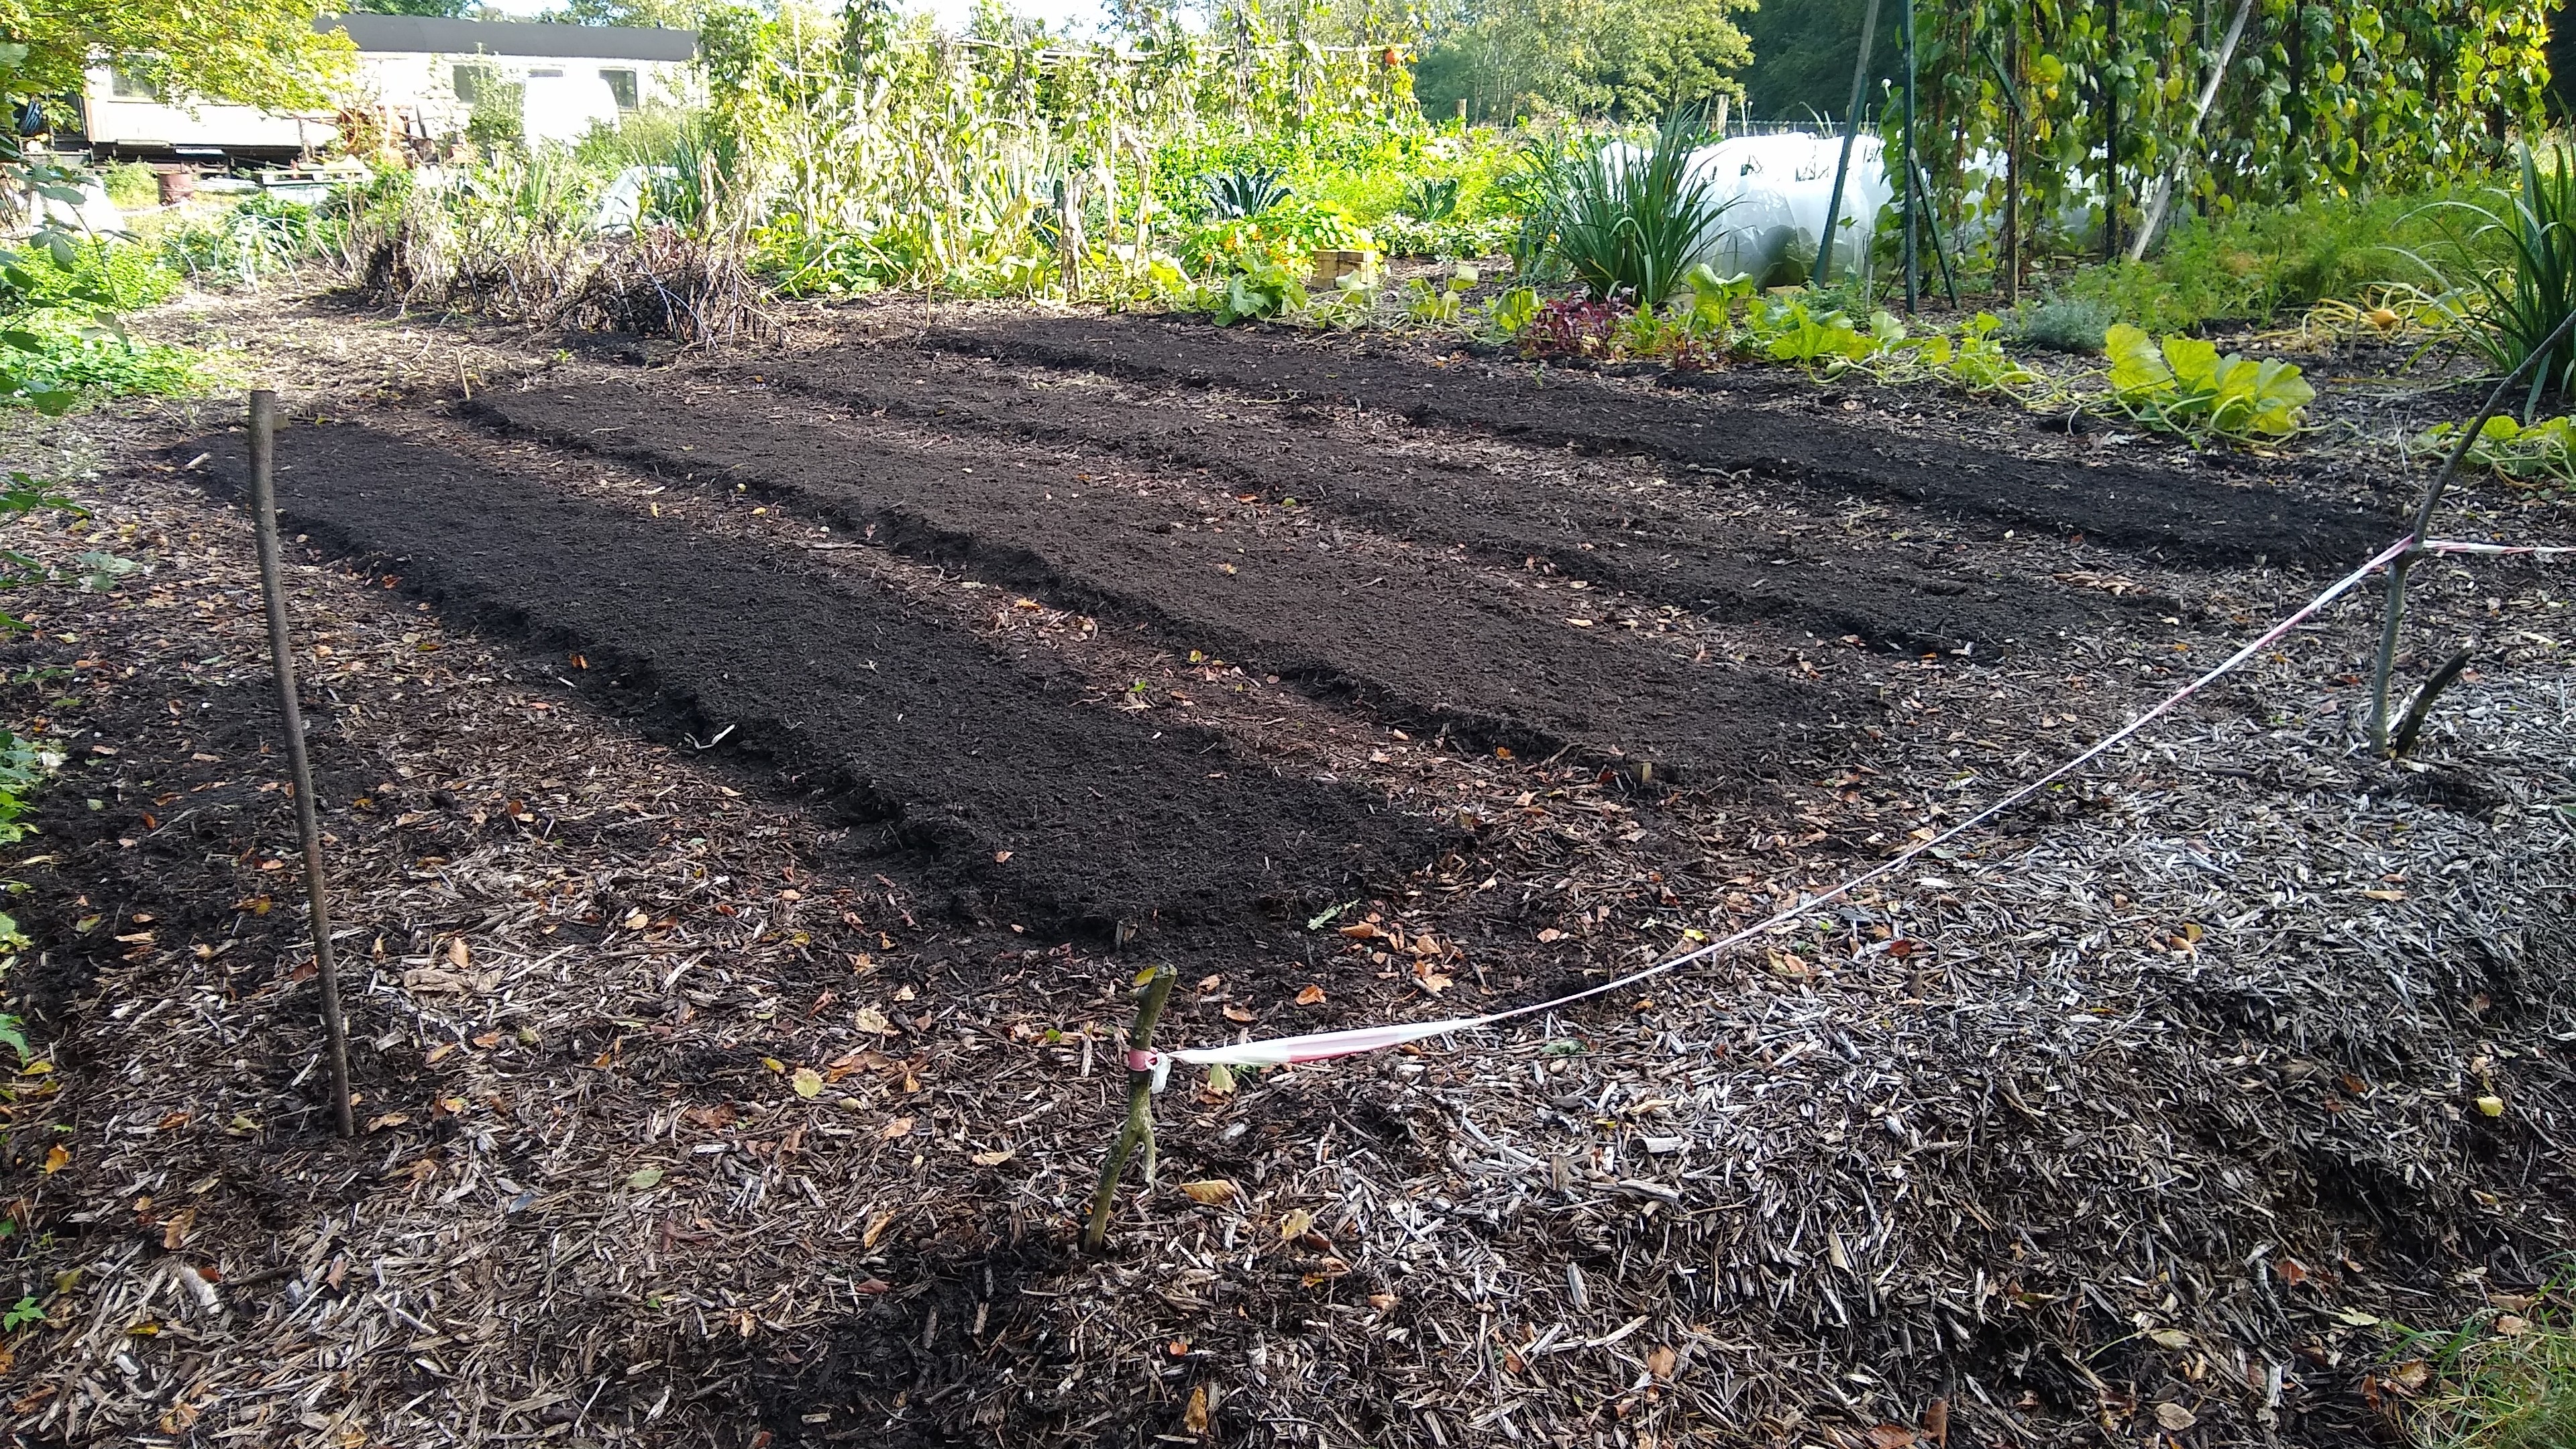 4 veg garden beds with dark soil and woodchip paths between them. a market garden with green plants in the background